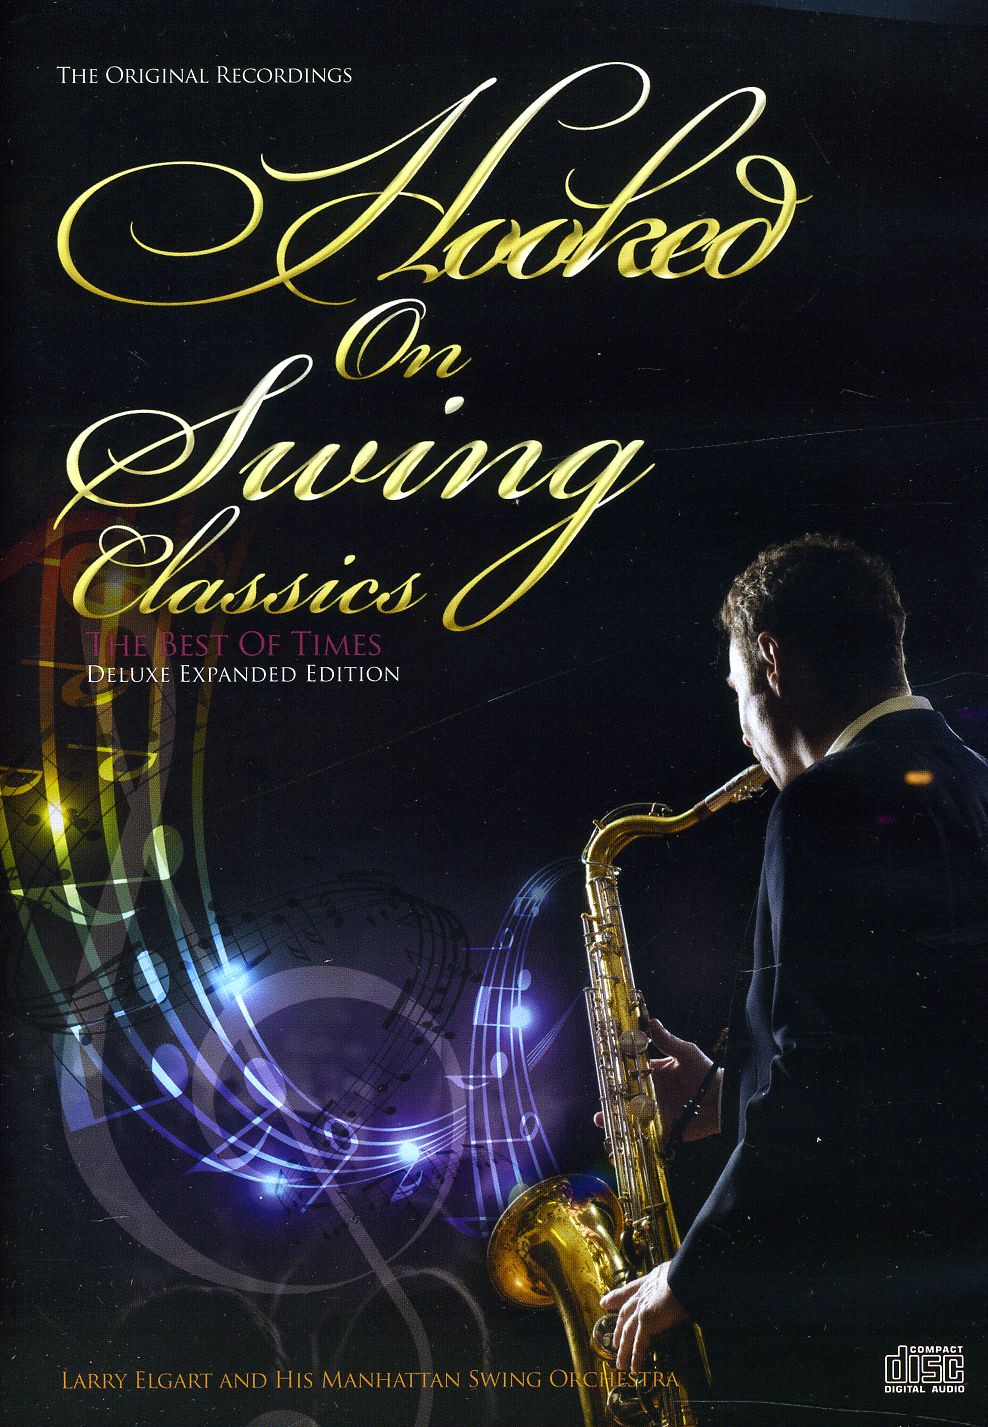 HOOKED ON SWING CLASSICS : BEST OF TIMES